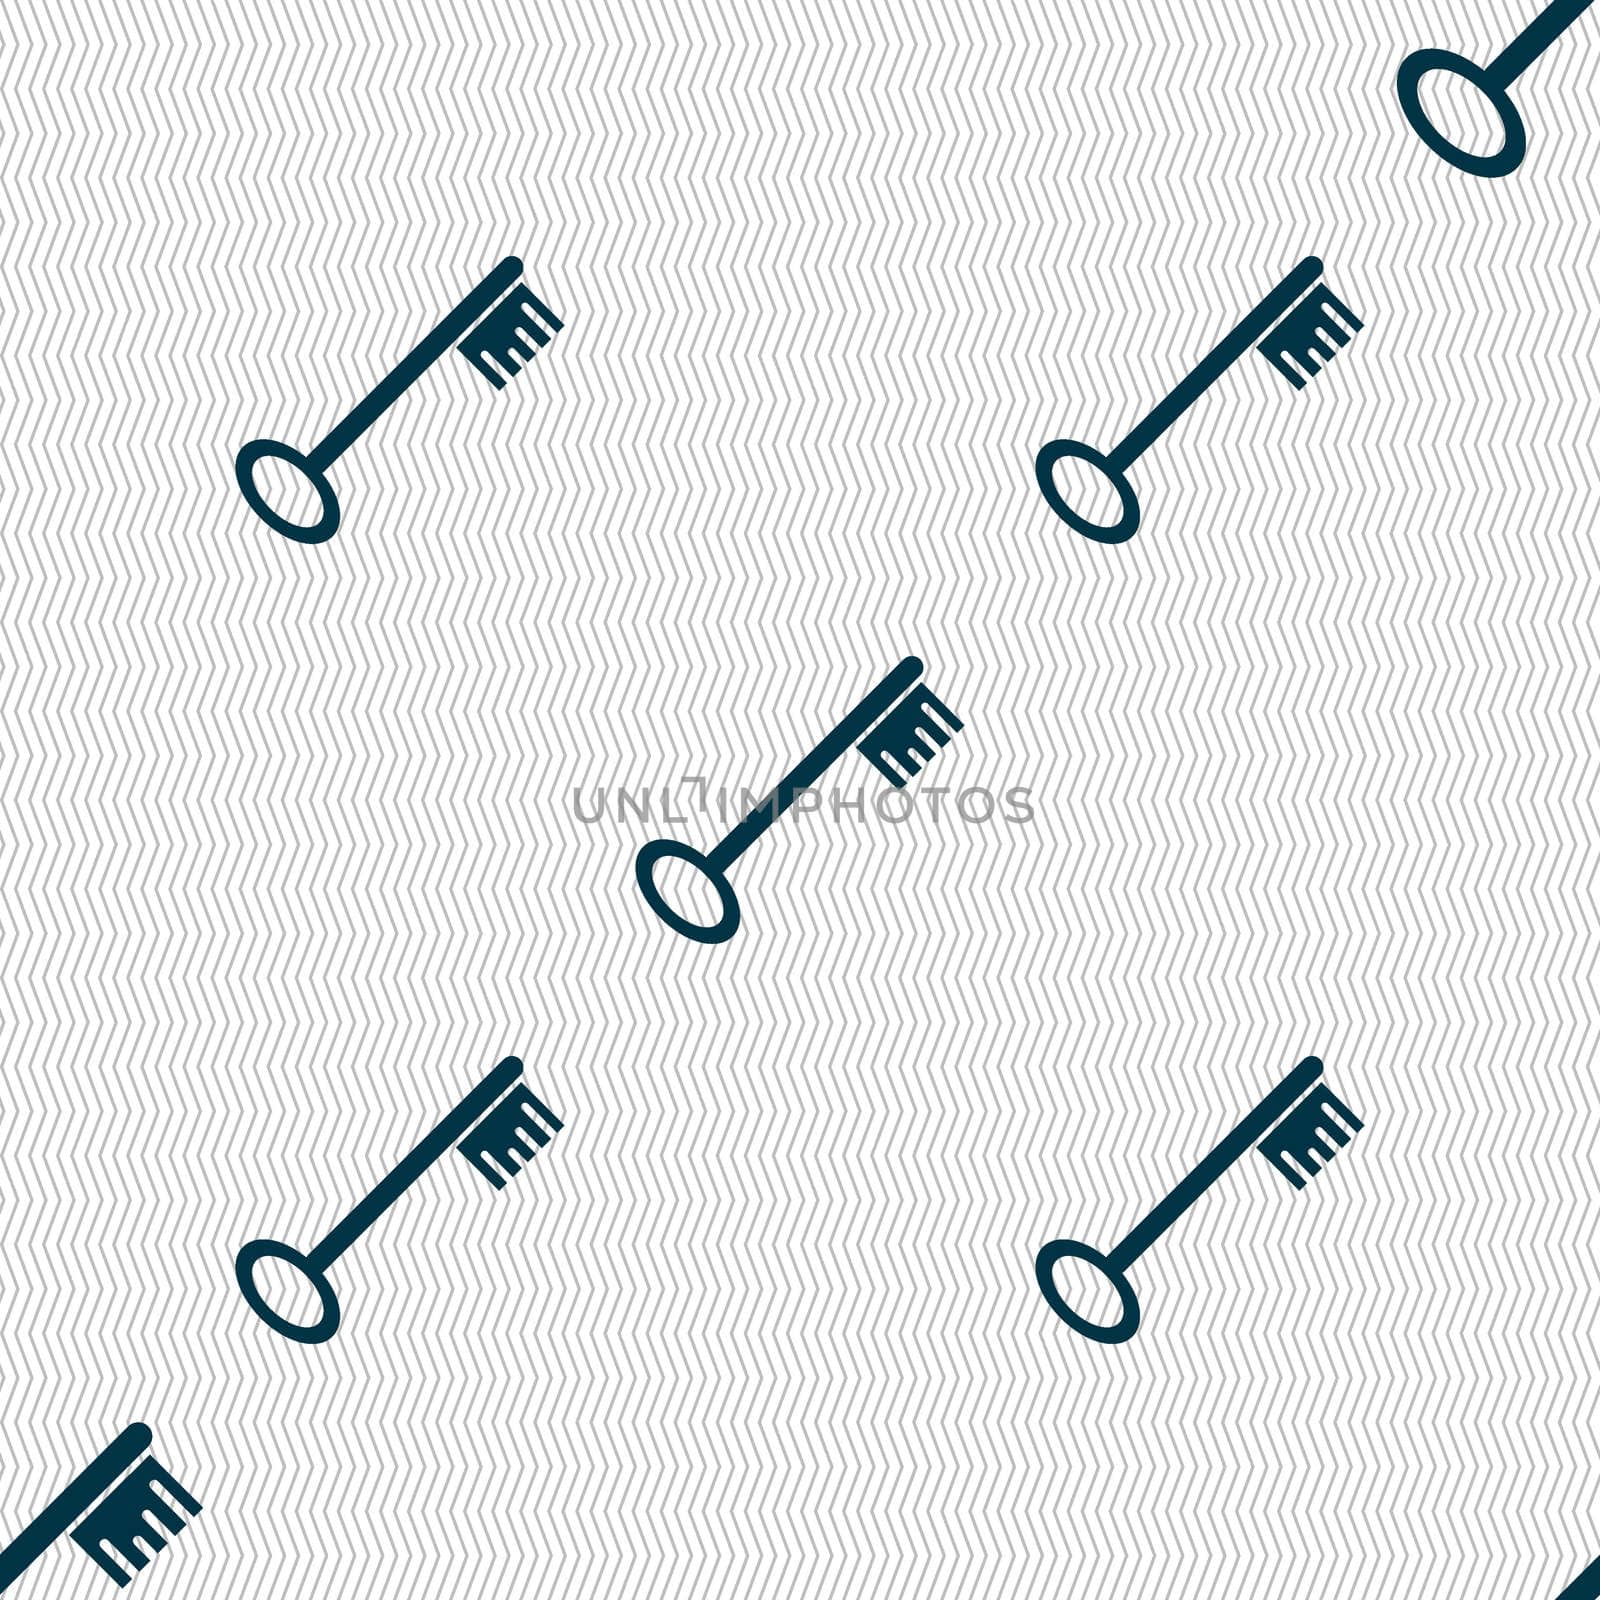 Key icon sign. Seamless abstract background with geometric shapes.  by serhii_lohvyniuk